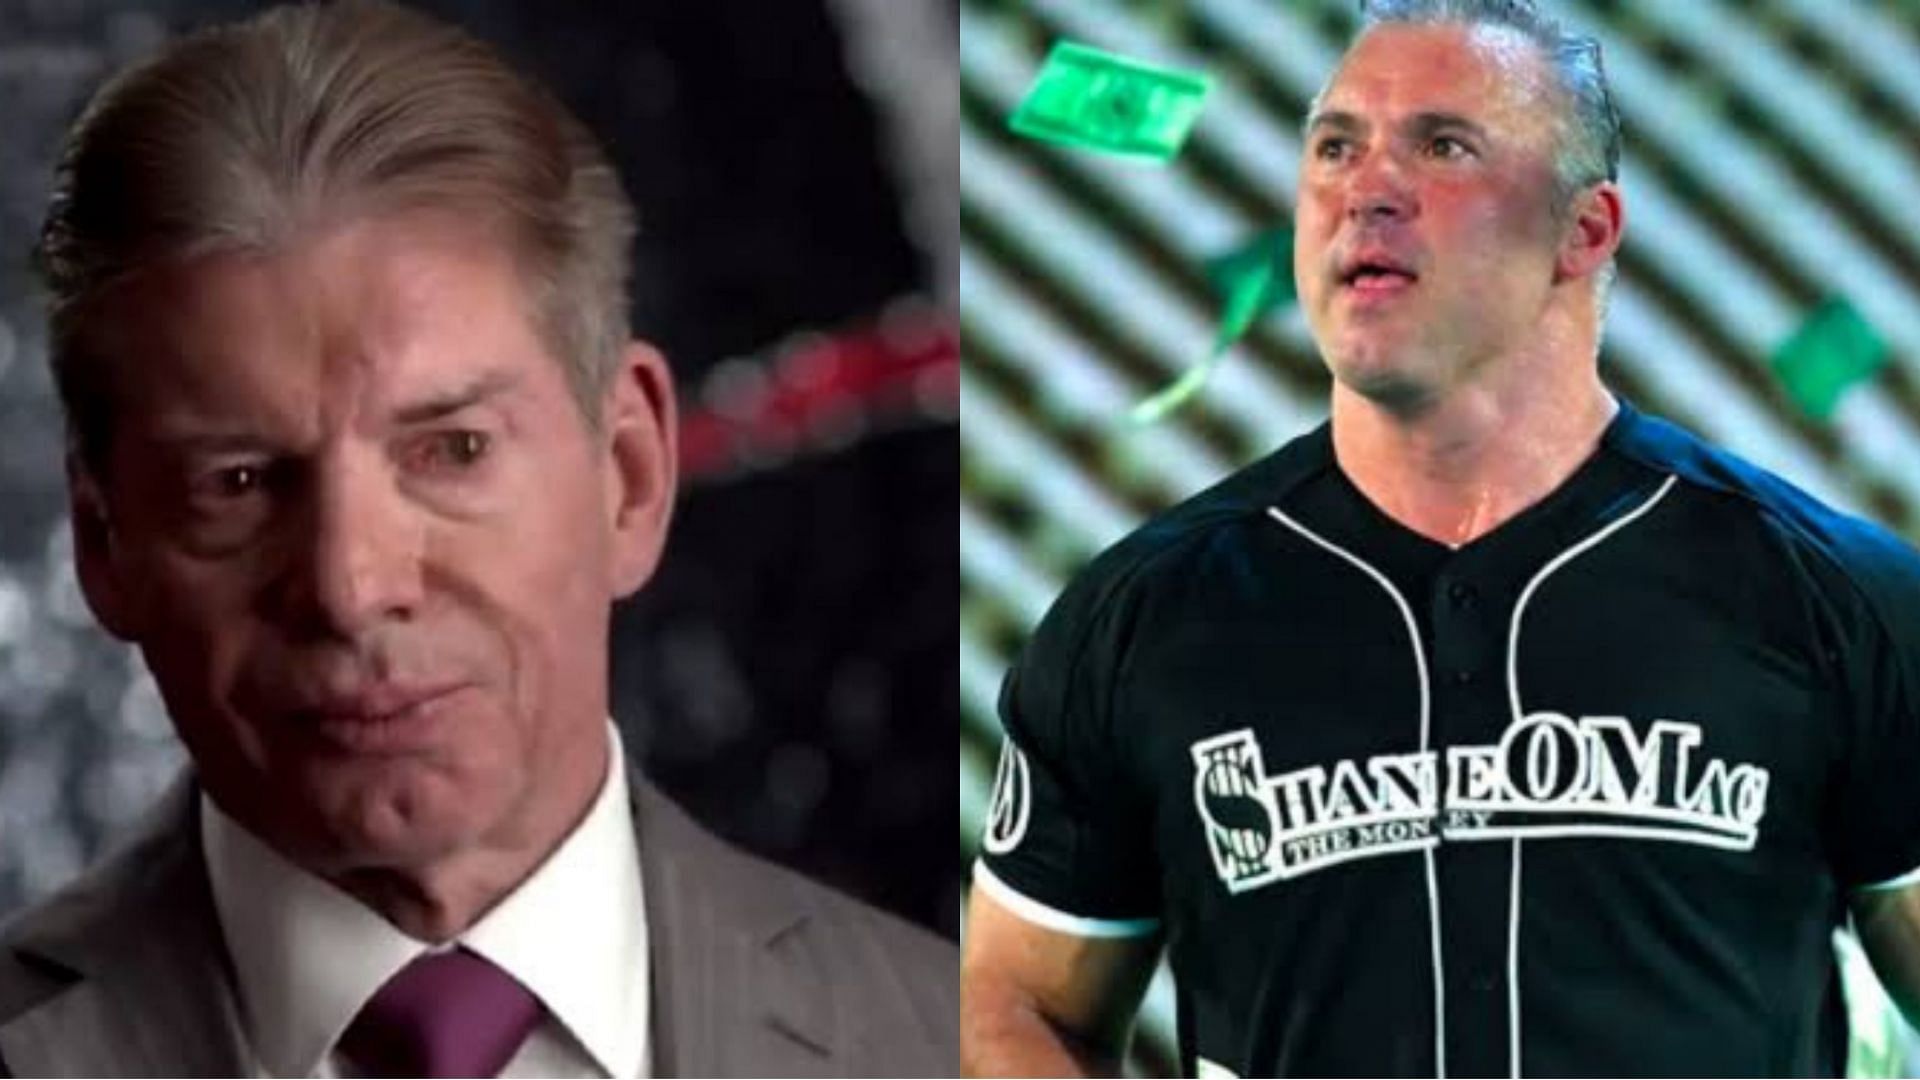 Vince McMahon (left) and Shane McMahon (right)